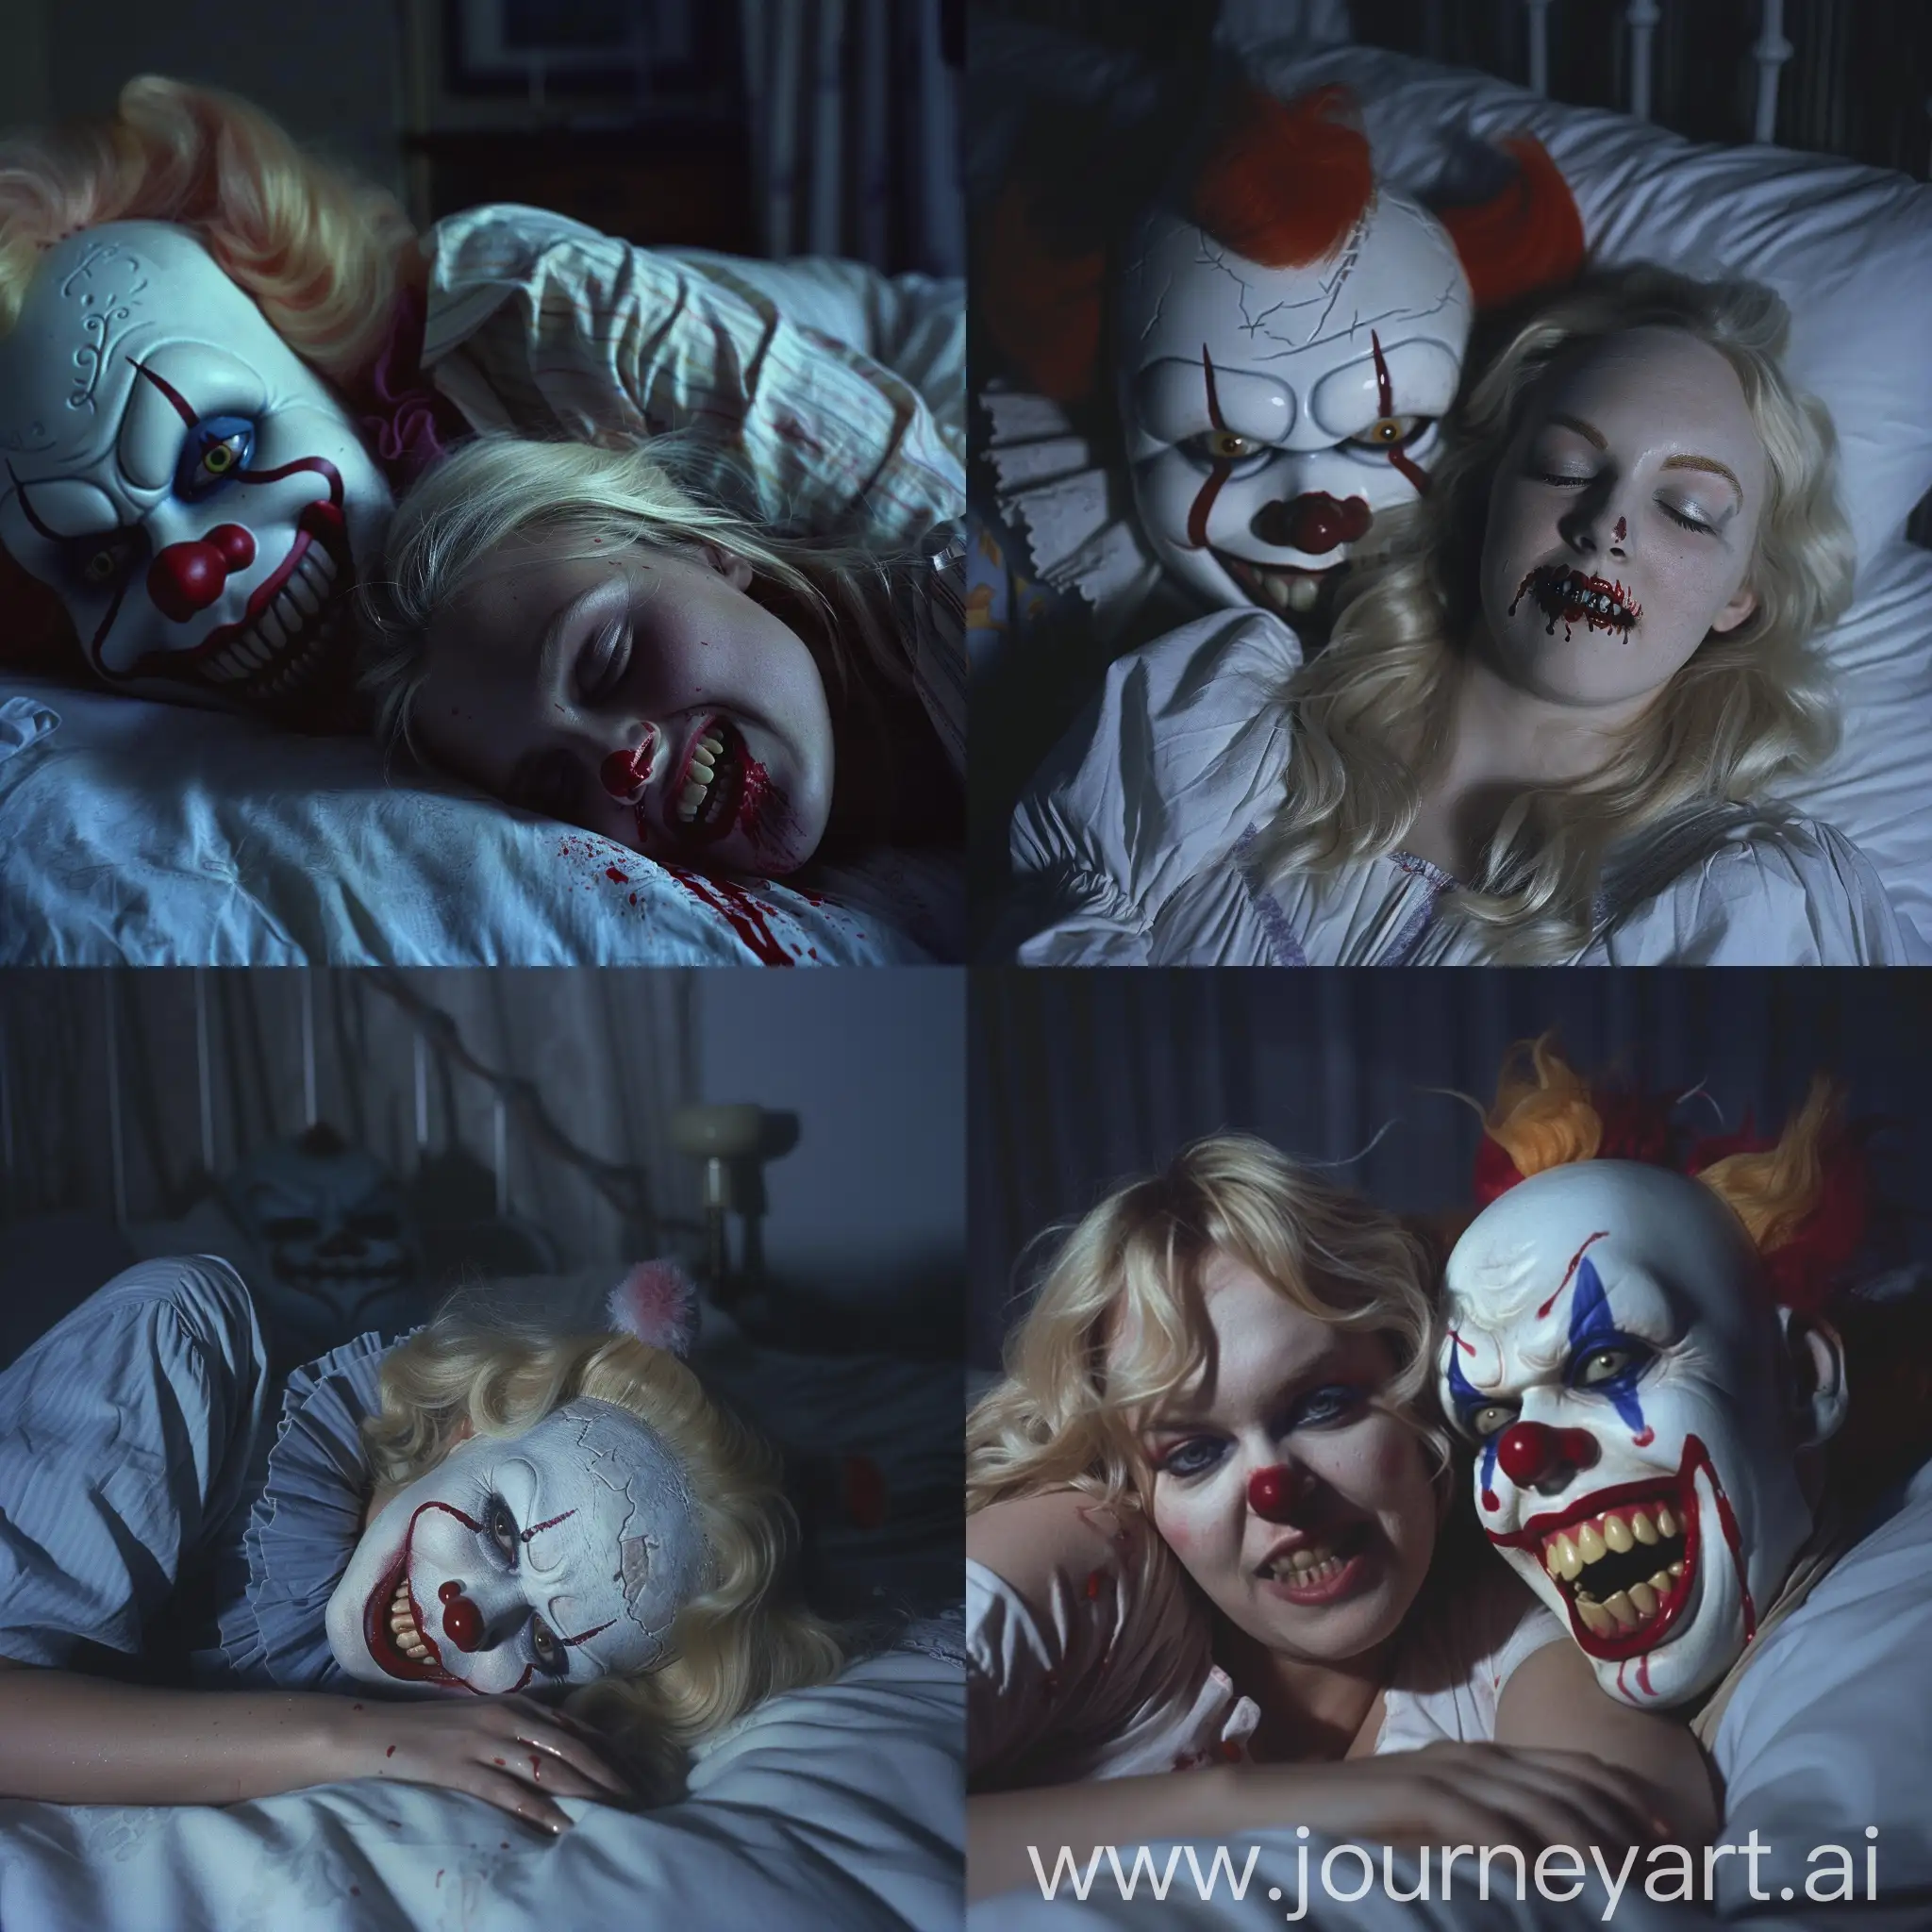 A blonde hair woman sleeping in the bed, dark bedroom, midnight, a scary clown is near her, the clown has big scary teeth, crimson liquid dripping out of clowns eyes, nightmare, dark eerie, vhs